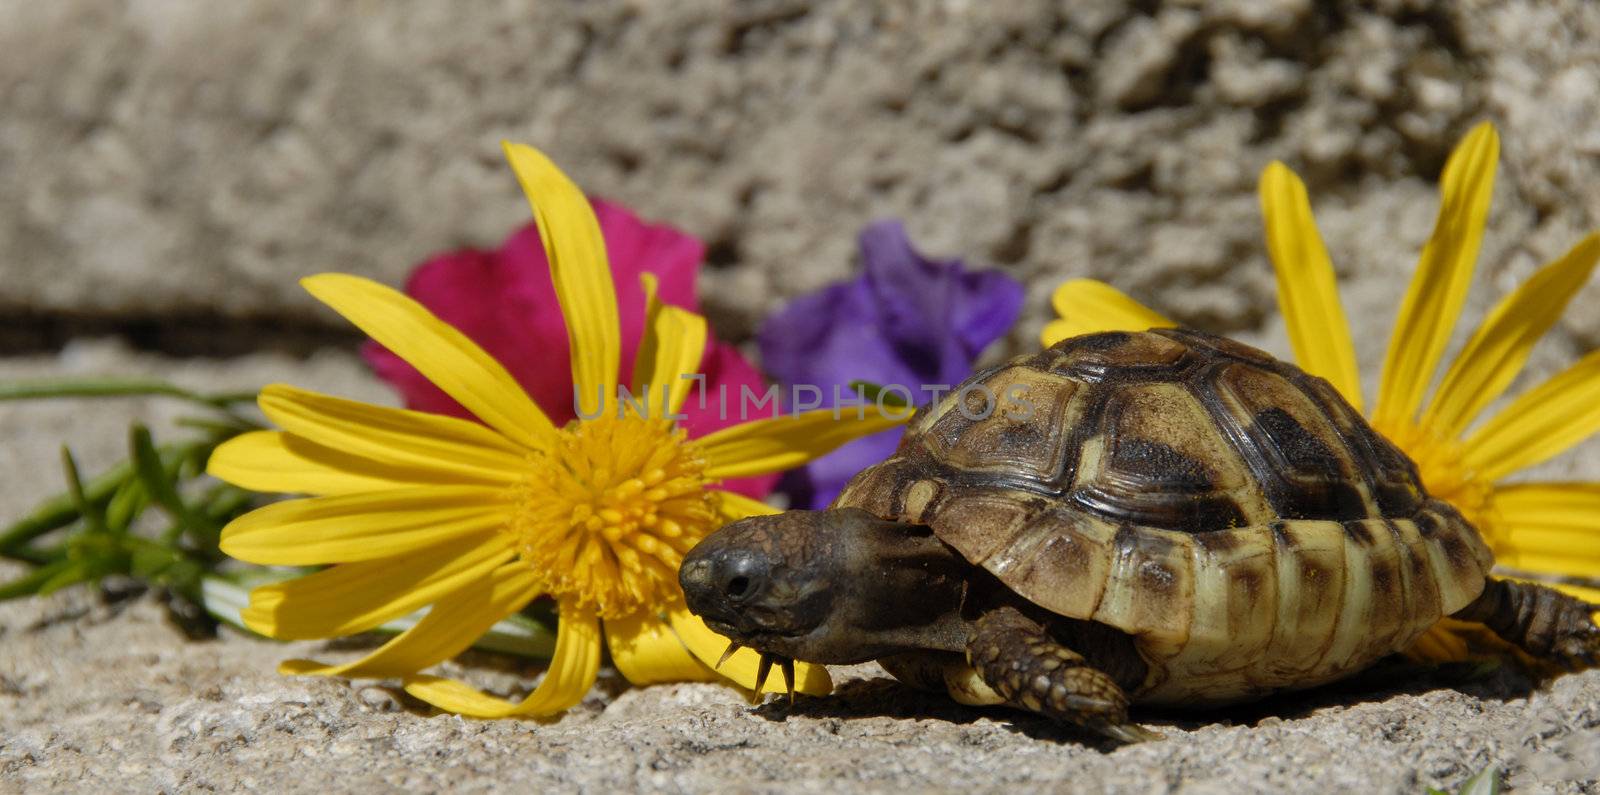 little turtle and flowers by cynoclub